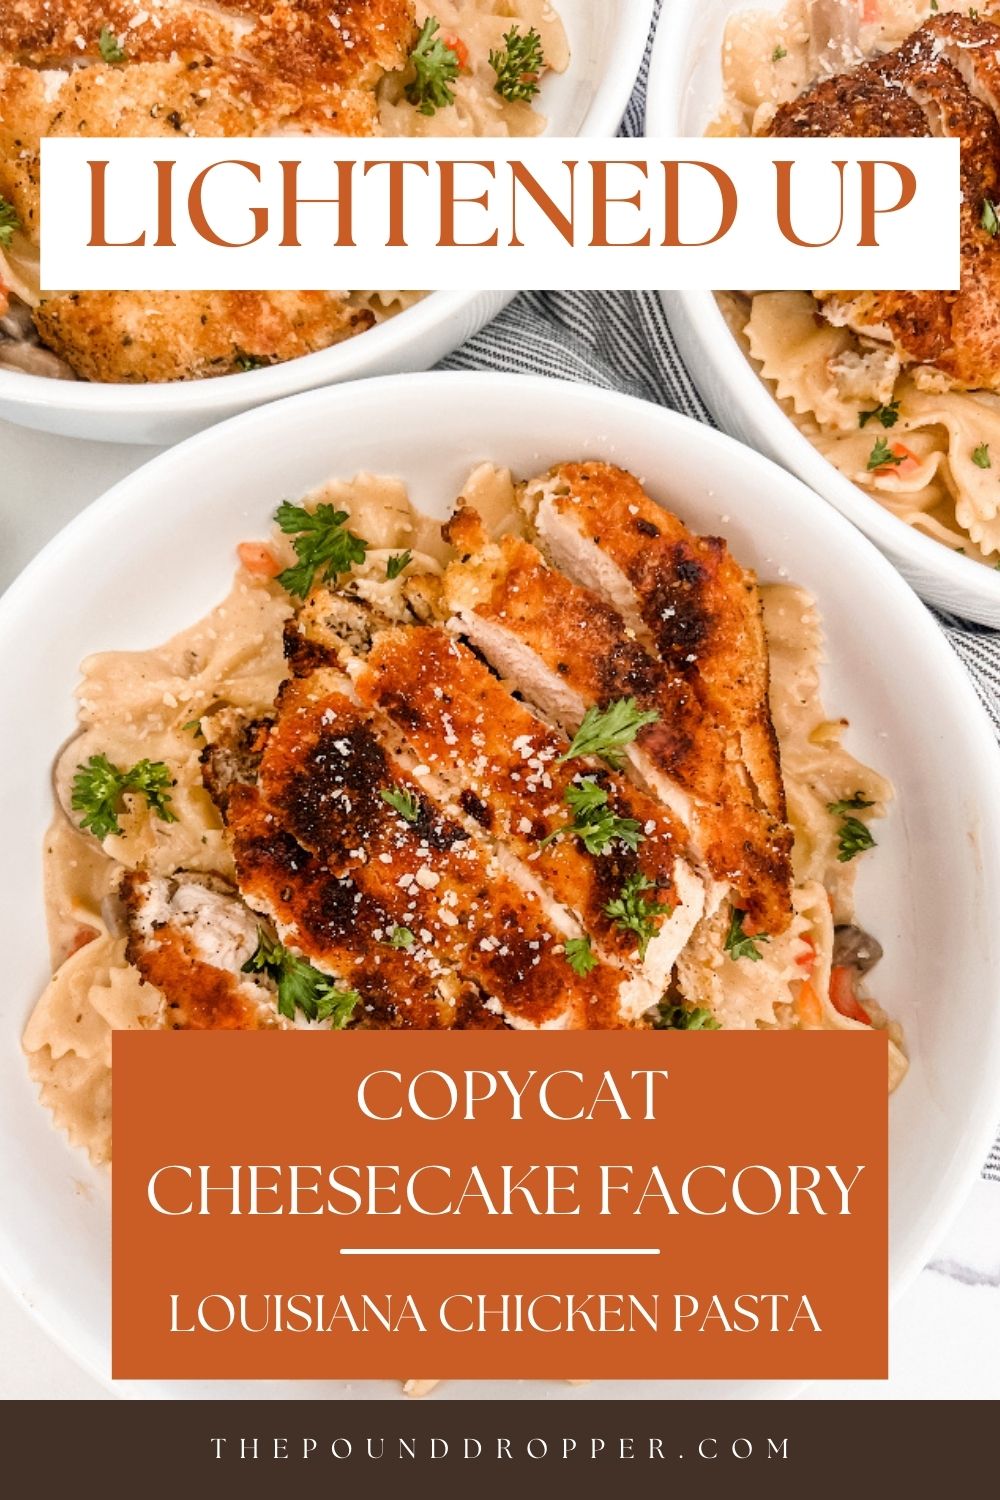 This Lightened Up Copycat Cheesecake Factory Louisiana Chicken Pasta is a lightened up dish from the Cheesecake Factory-packed with mushrooms, onions, and bell peppers, bow tie pasta, then smothered in a creamy cajun sauce, and topped with a Parmesan crusted chicken breast! It's a simple skillet meal that comes together quickly and is loaded with goodness! via @pounddropper